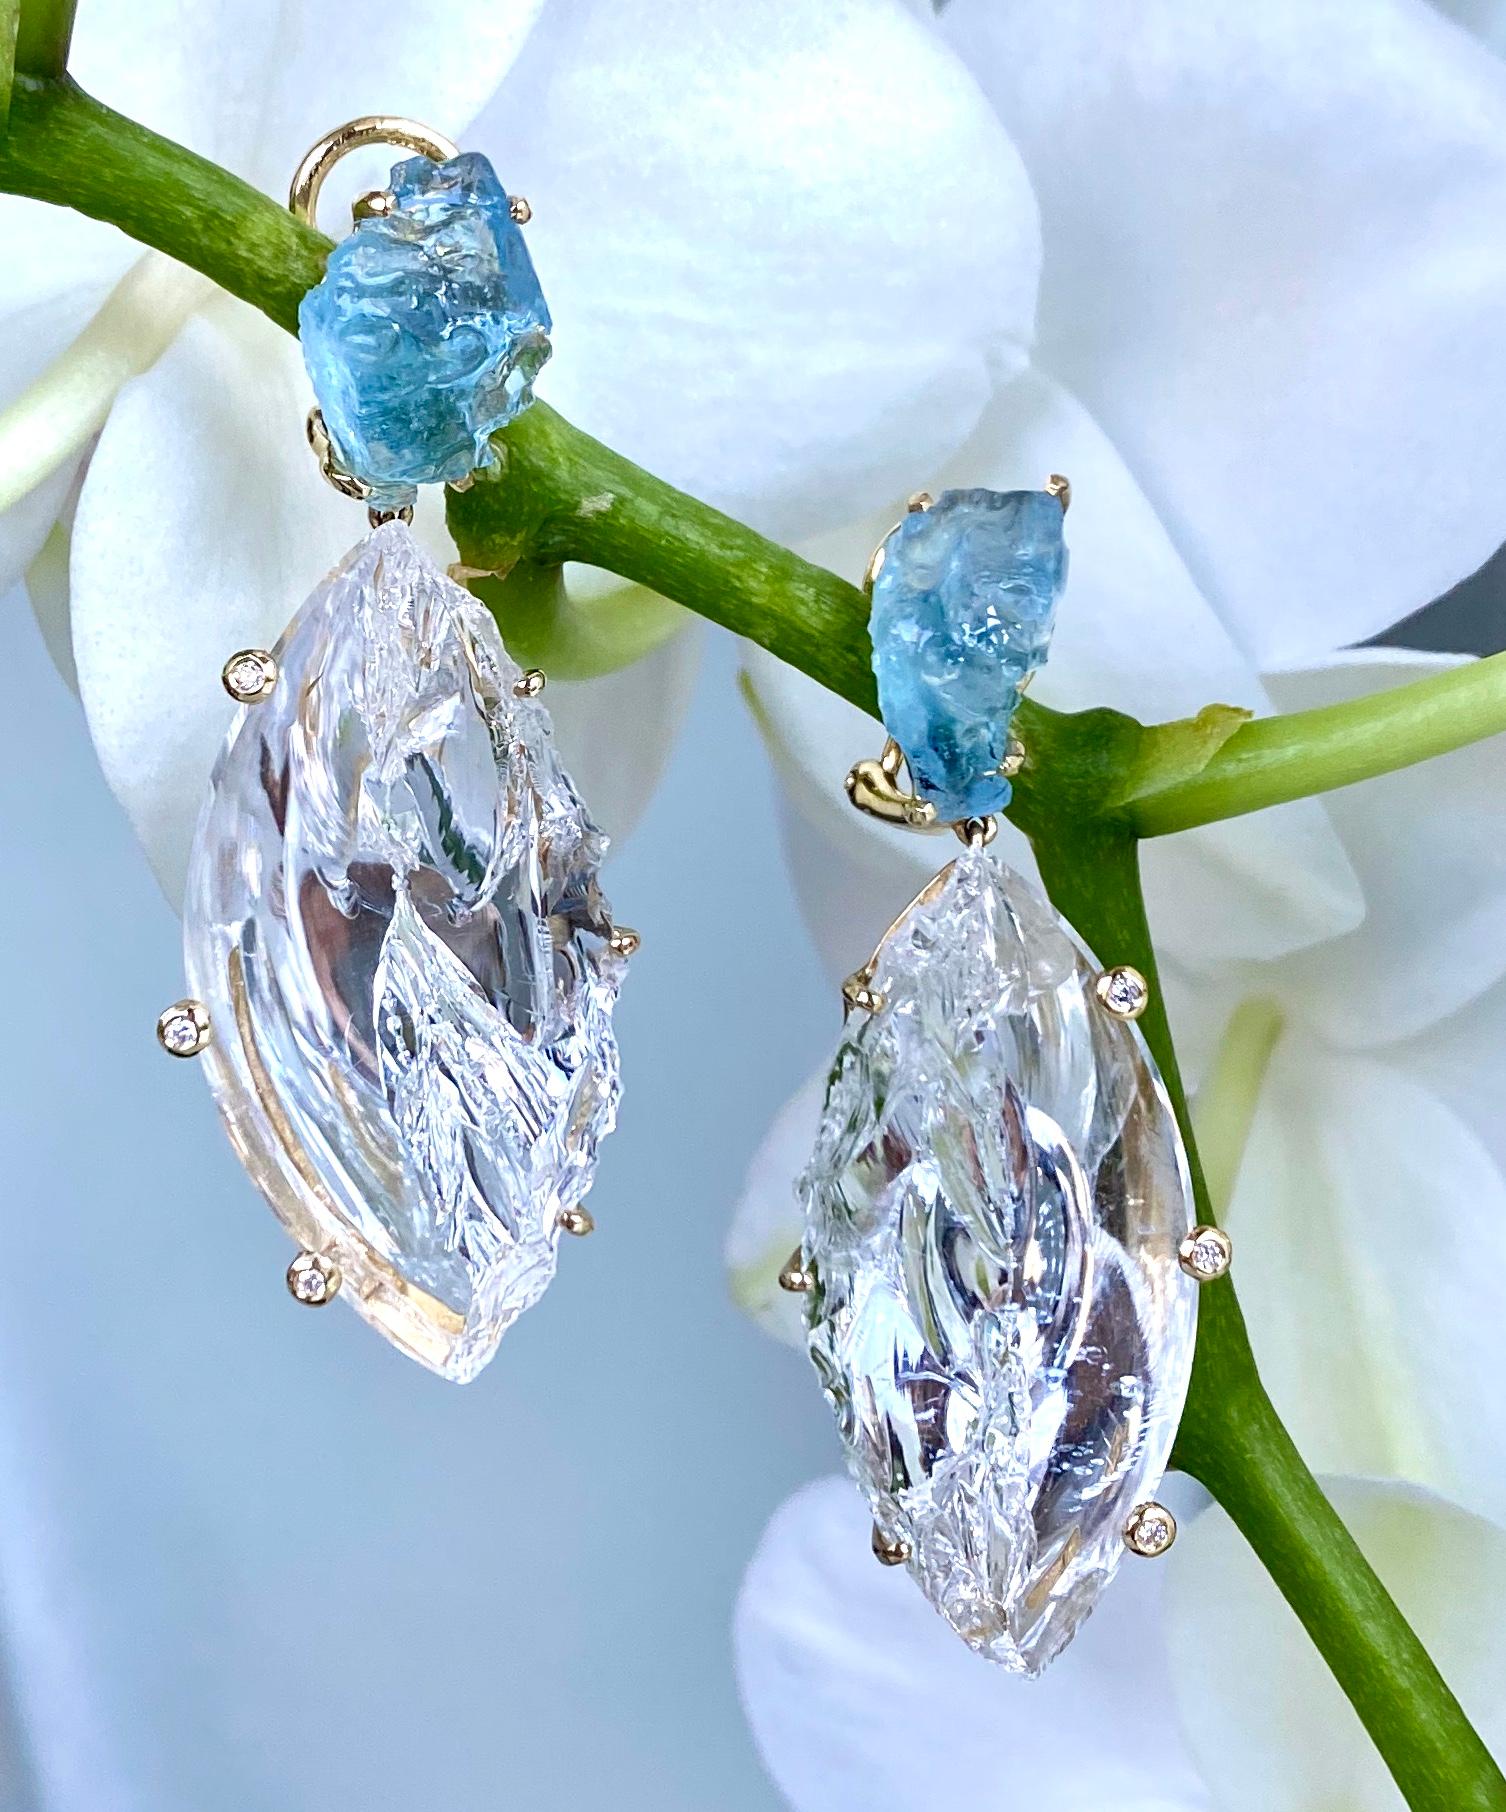 Dangle earrings of natural rough aquamarines, carved white quartz and diamonds, handcrafted in 18 karat yellow gold. 

These unique one-of-a-kind fancy, carved white quartz and rough aquamarine gemstones make an icy statement. Embellished with white